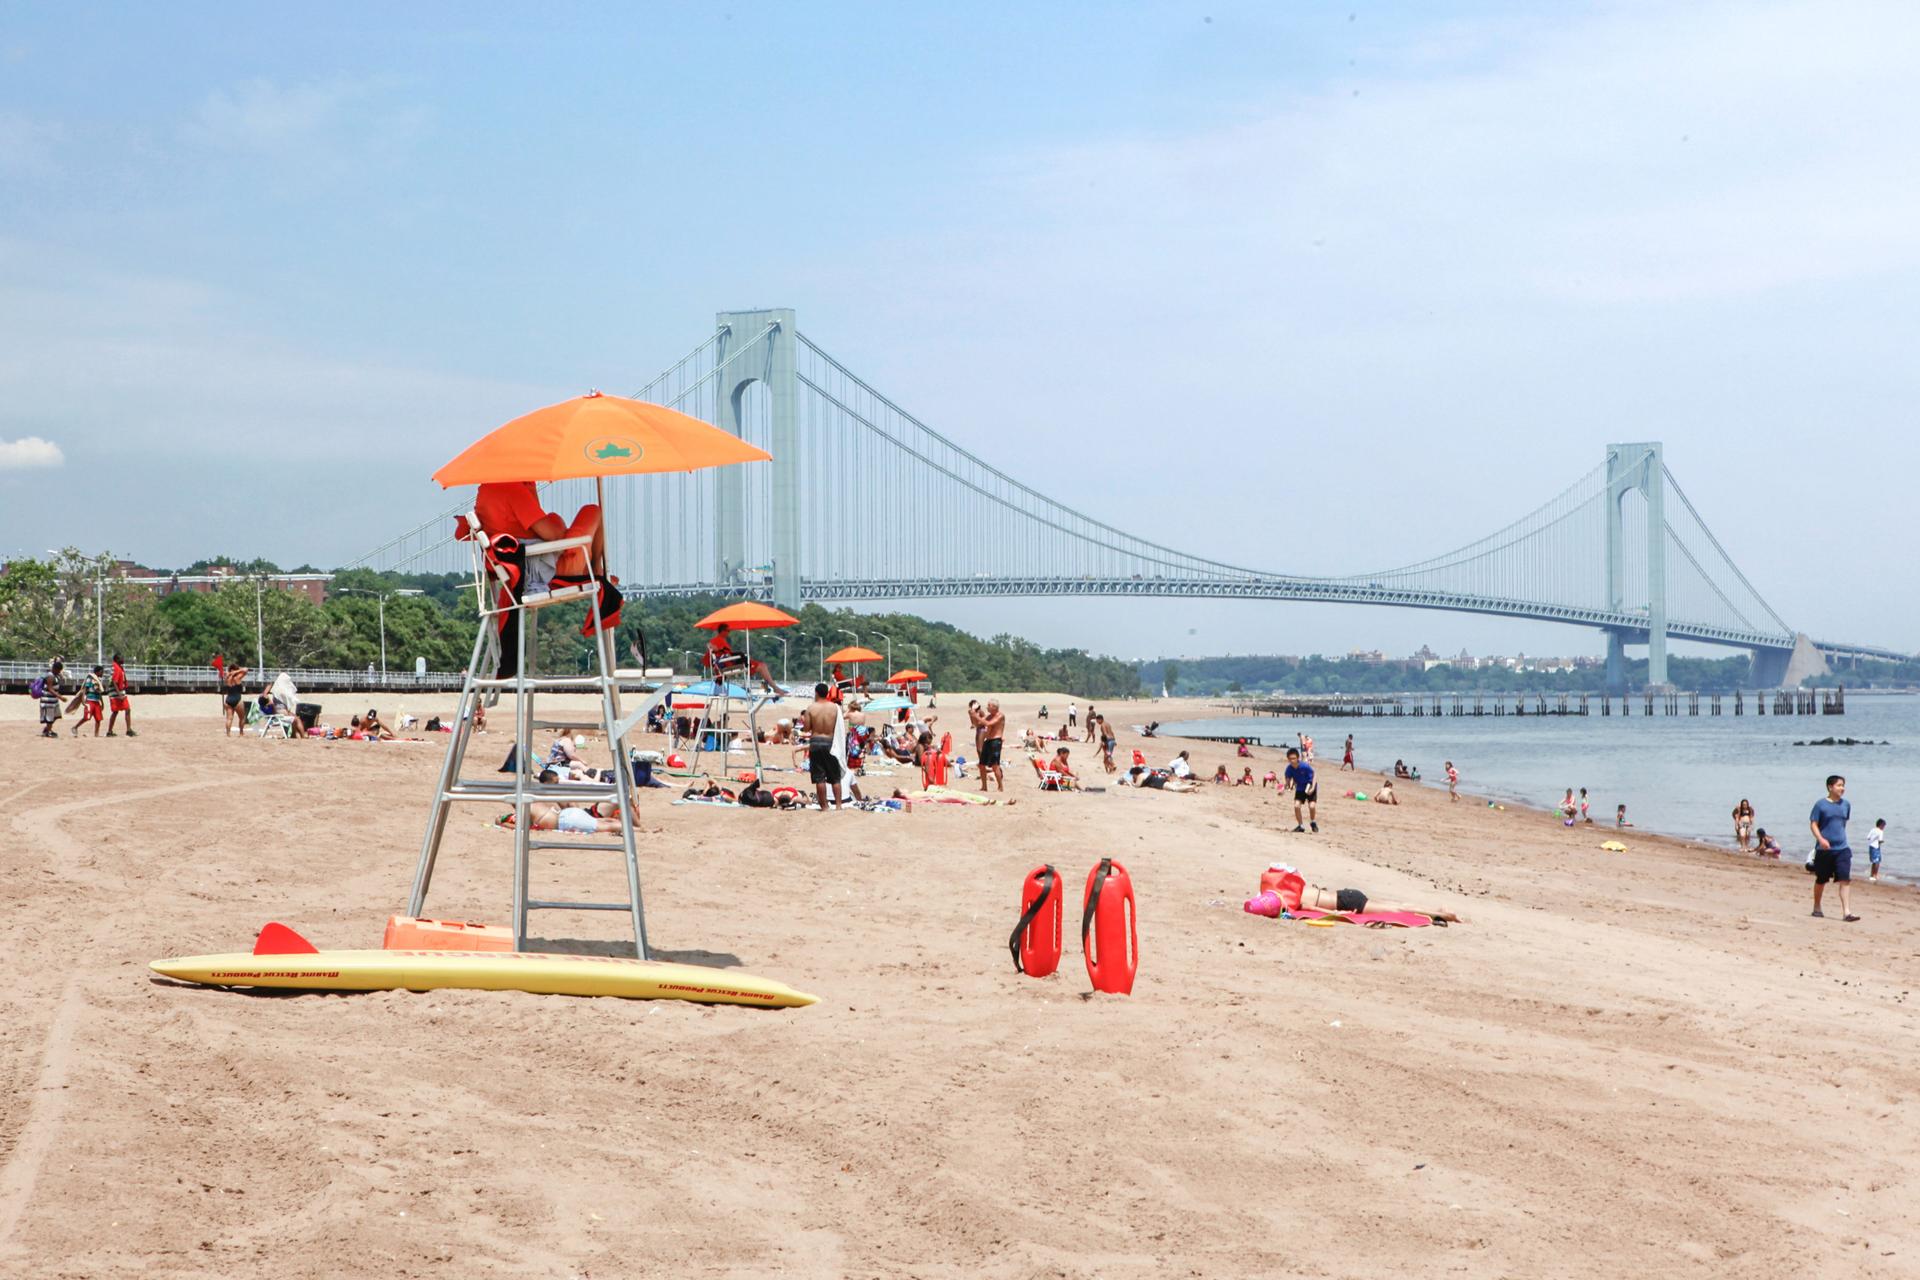 A lifeguard at South Beach,  Verrazano-Narrows Bridge in the background, in Staten Island 